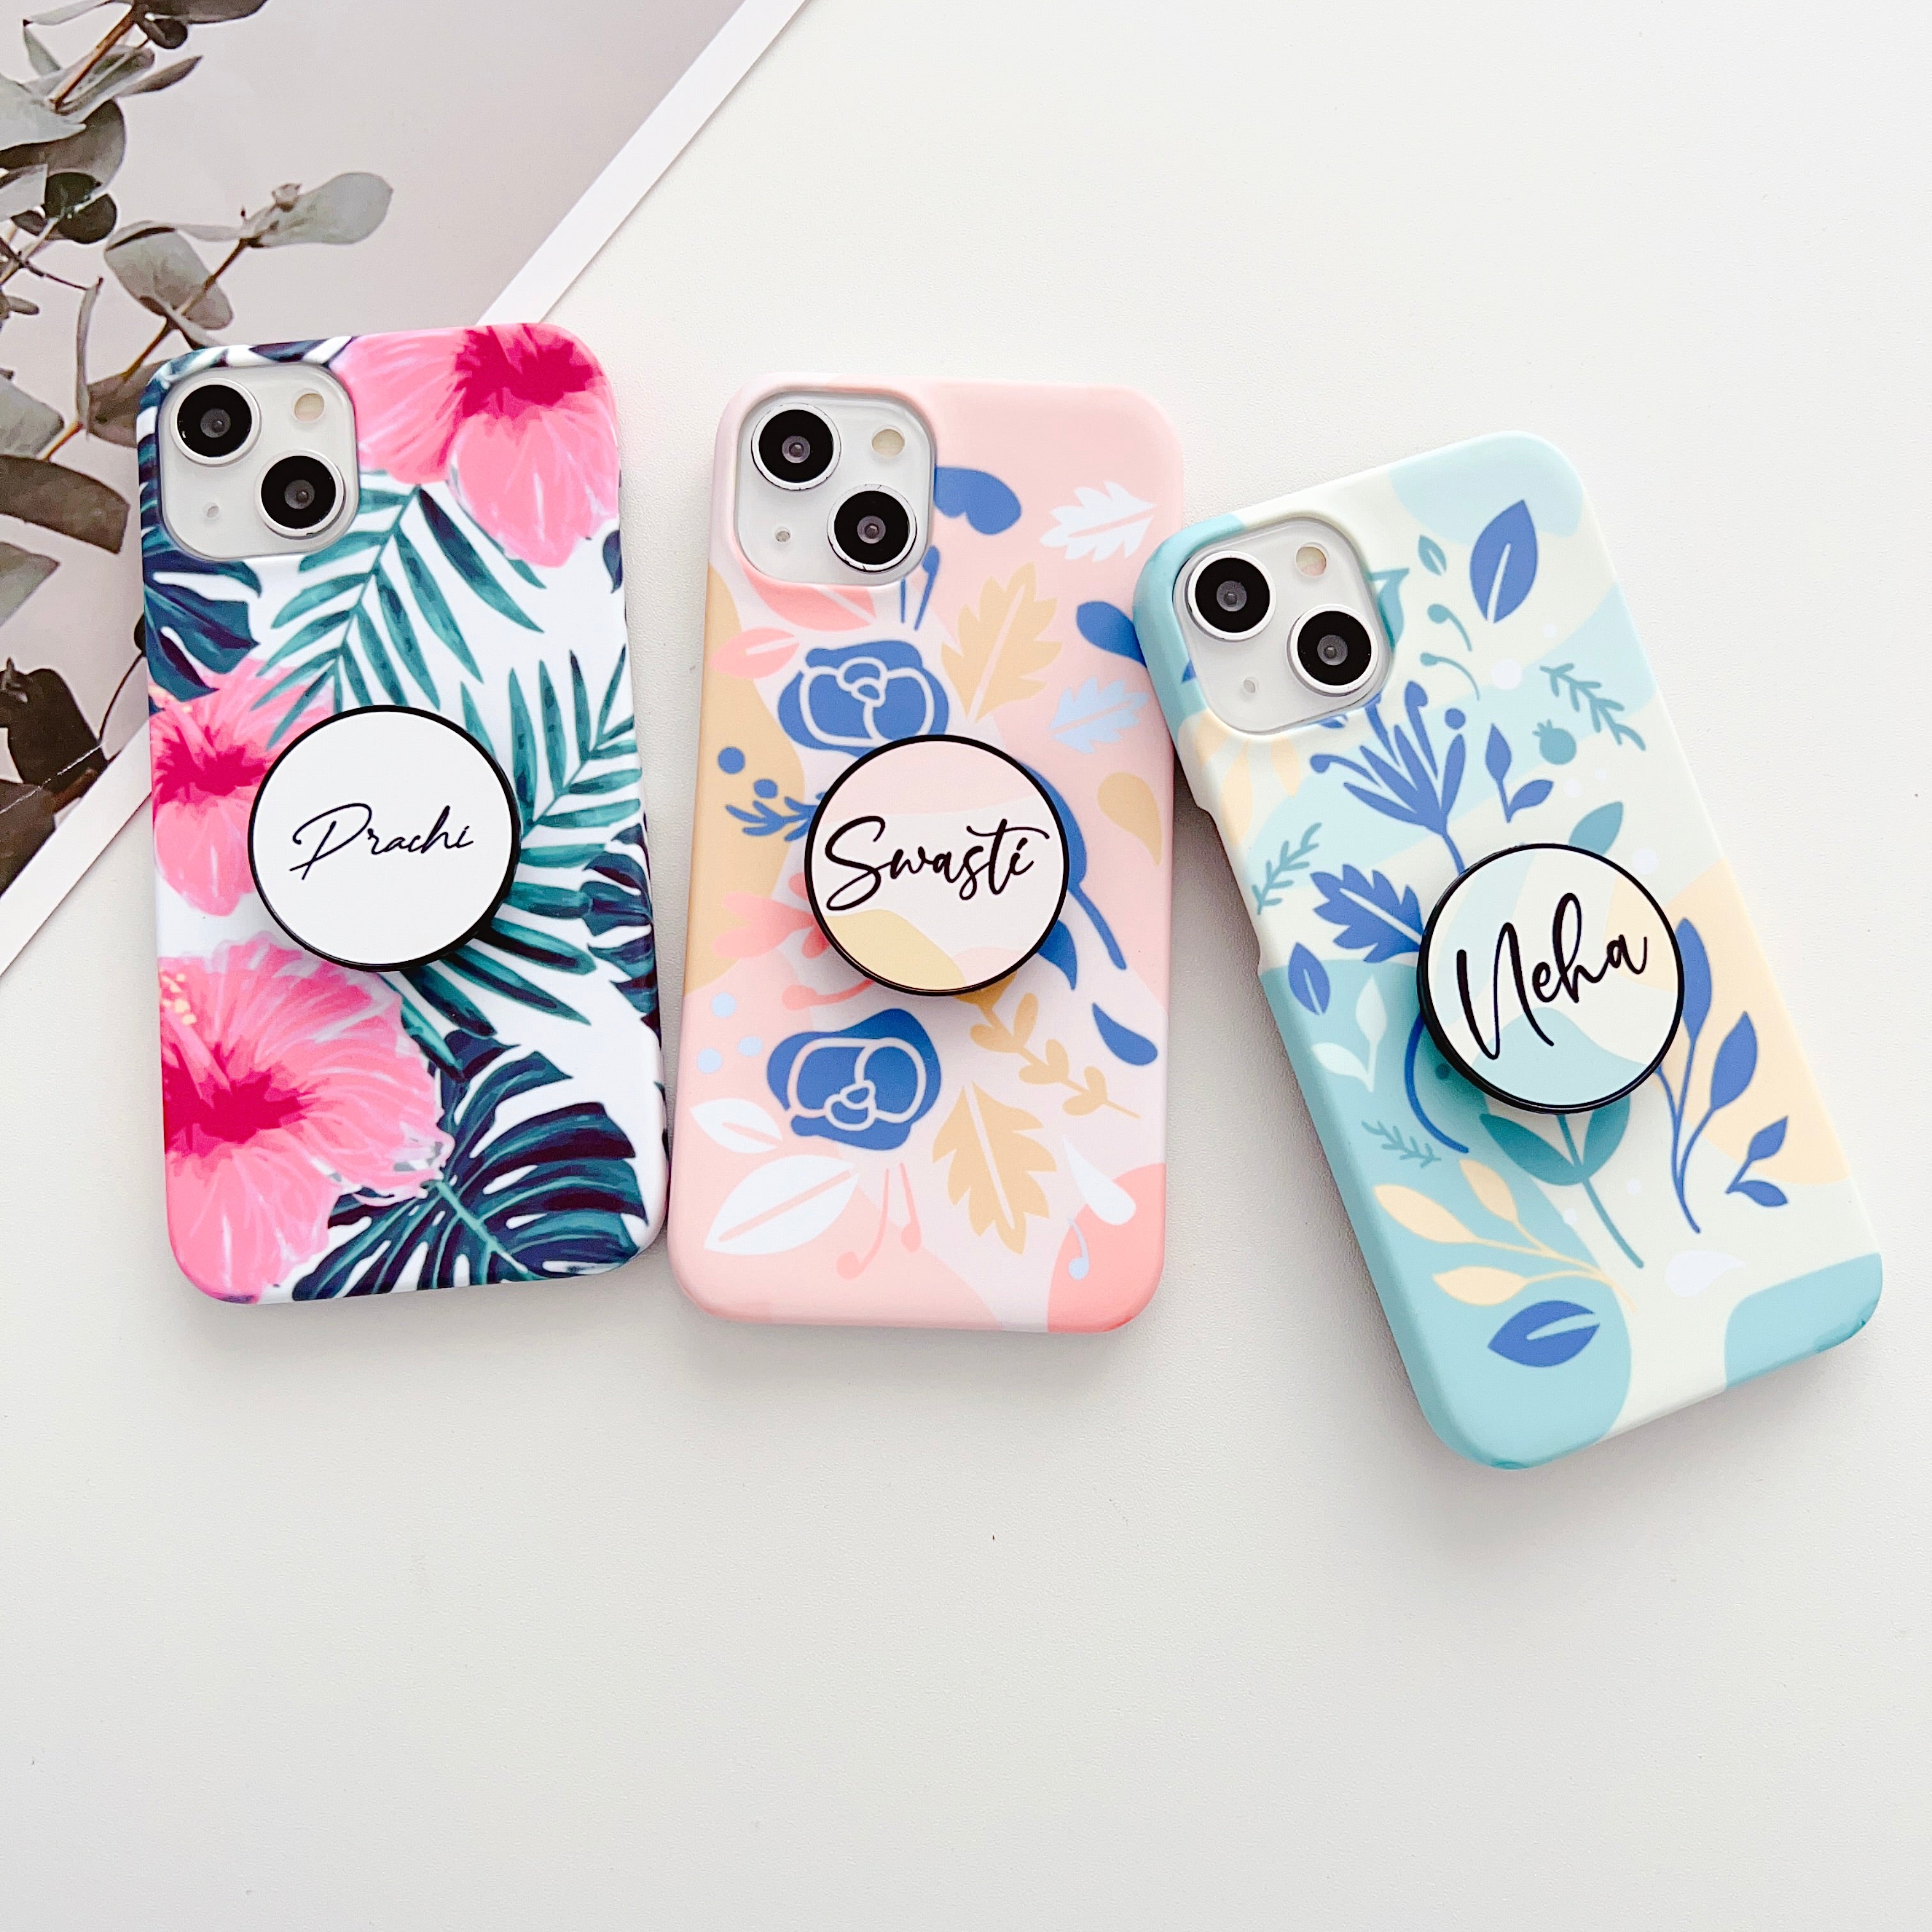 Iphone Cases Website templates - Ecommerce Iphone Cases Templates on Shopify